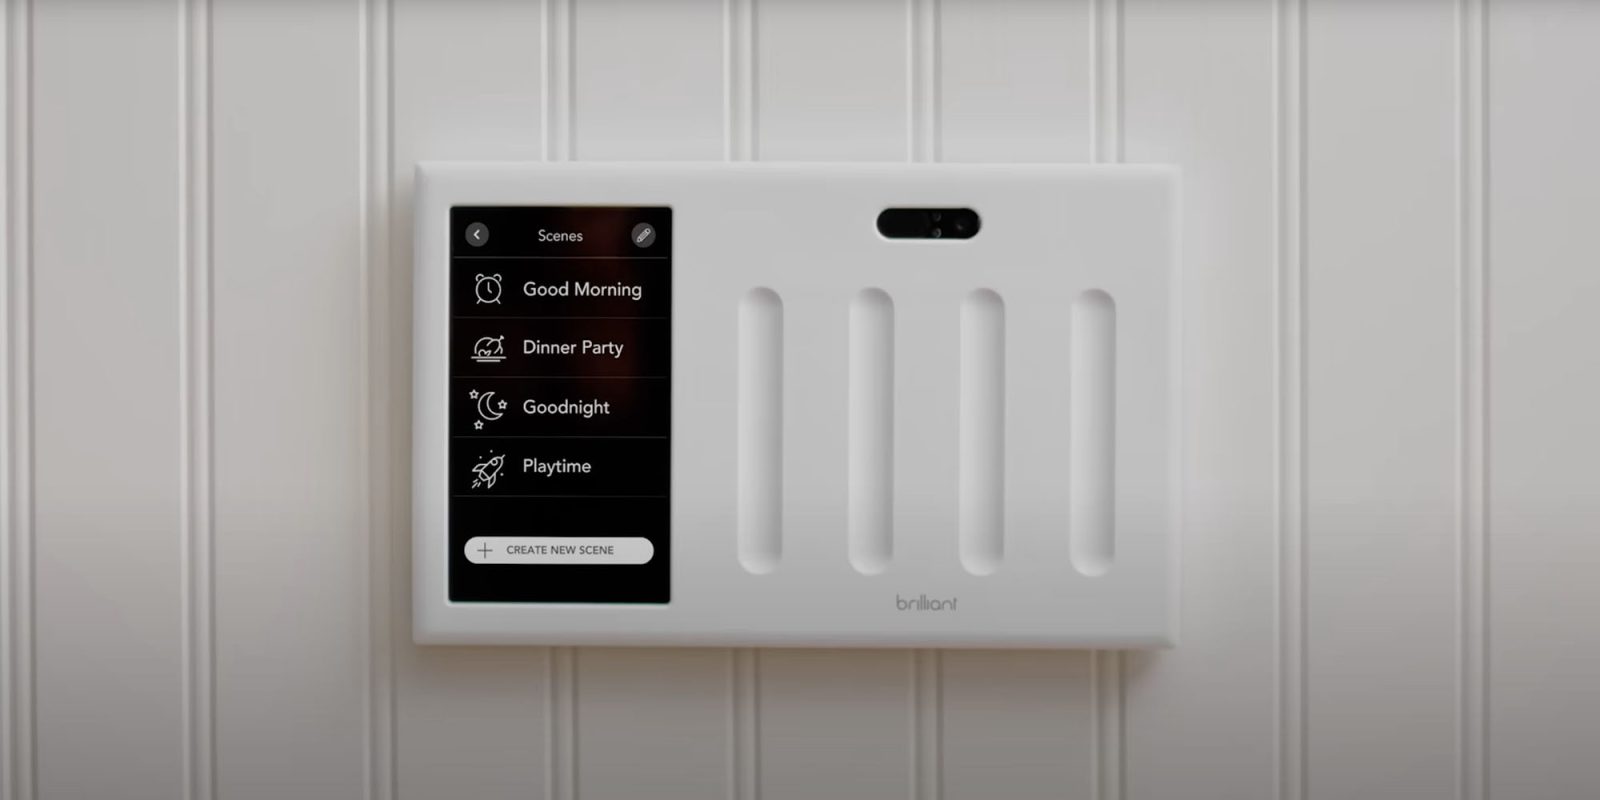 HomeKit or Matter compatibility key as Brilliant switches (shown) under threat